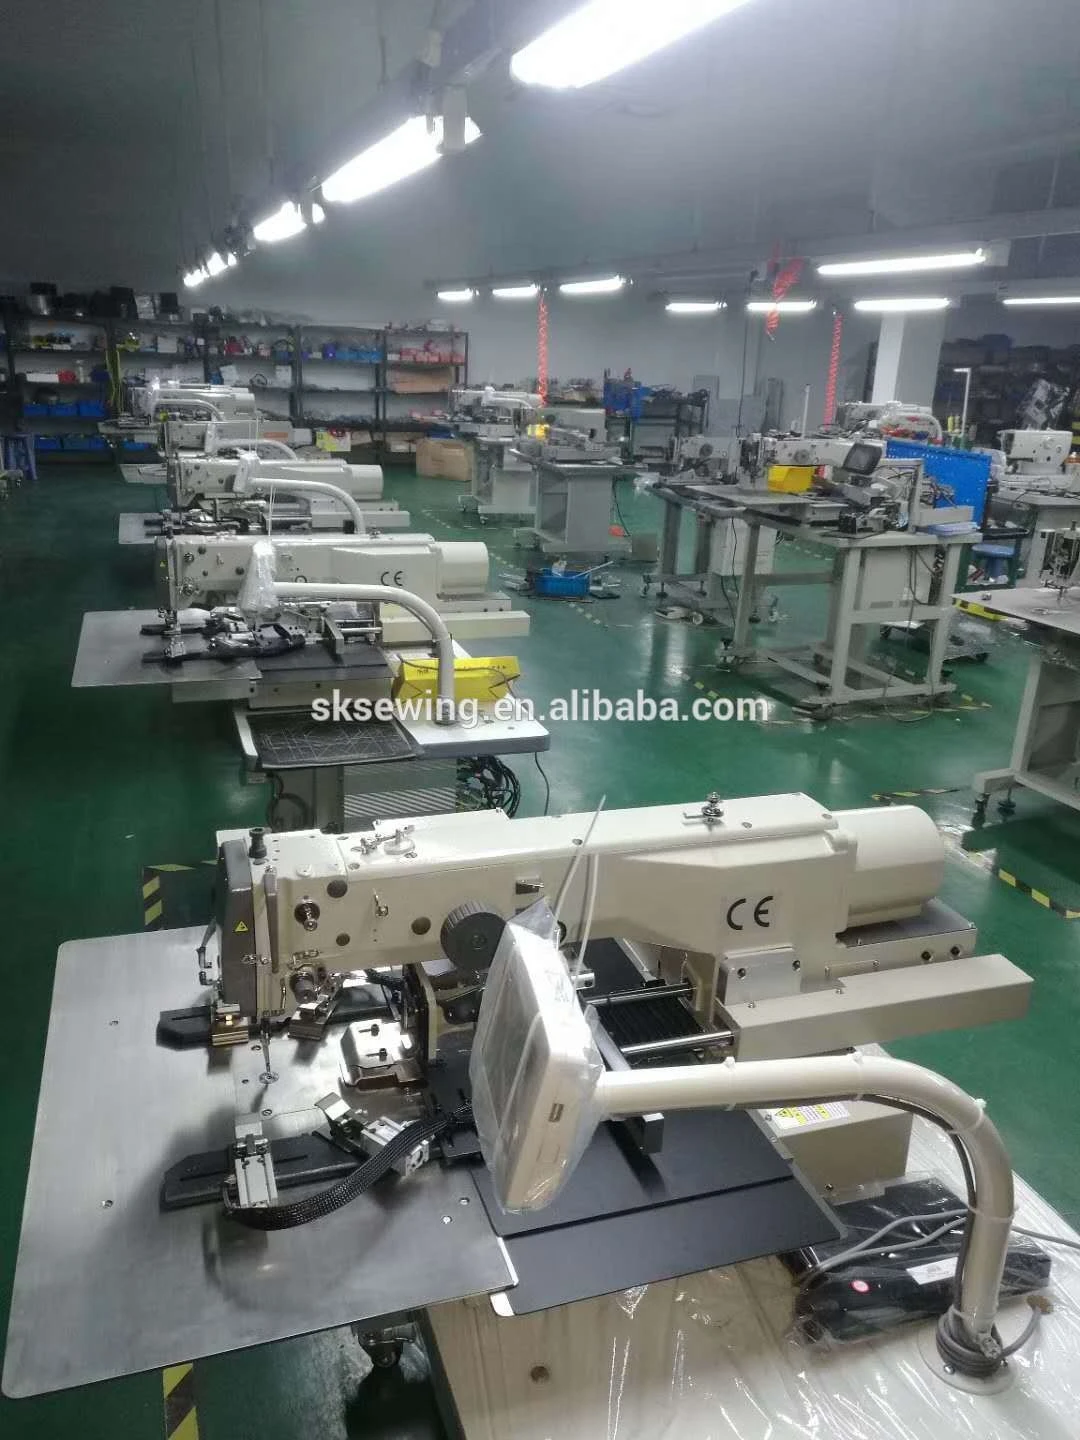 Automatic lock stitch computer pattern industrial sewing machine for garment